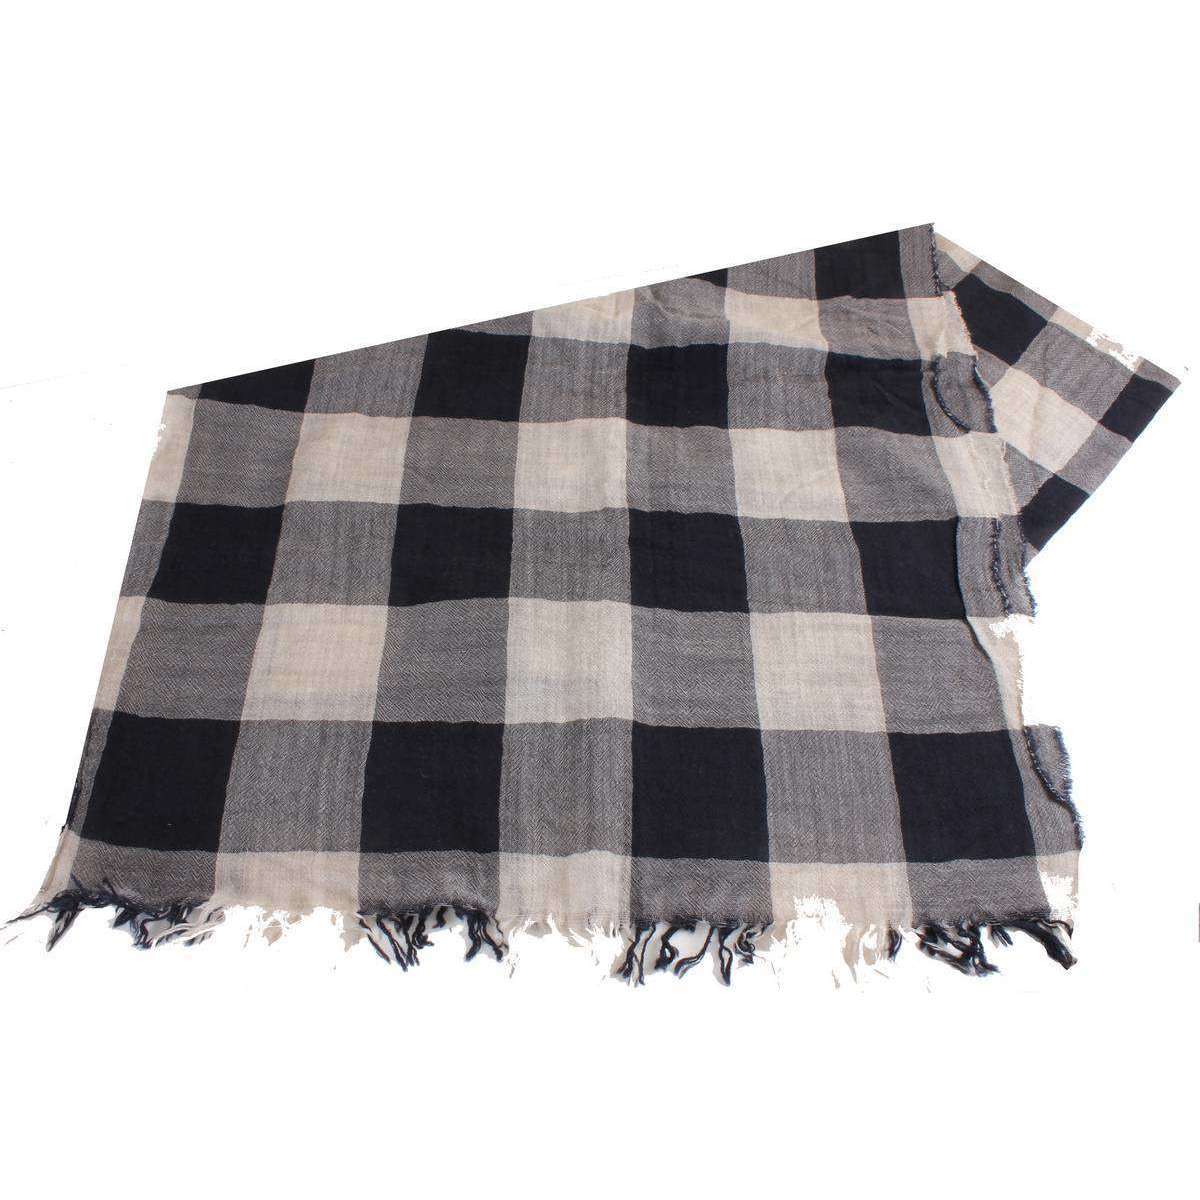 Bassin and Brown Meagan Check Wool Scarf - Beige/Black/Grey